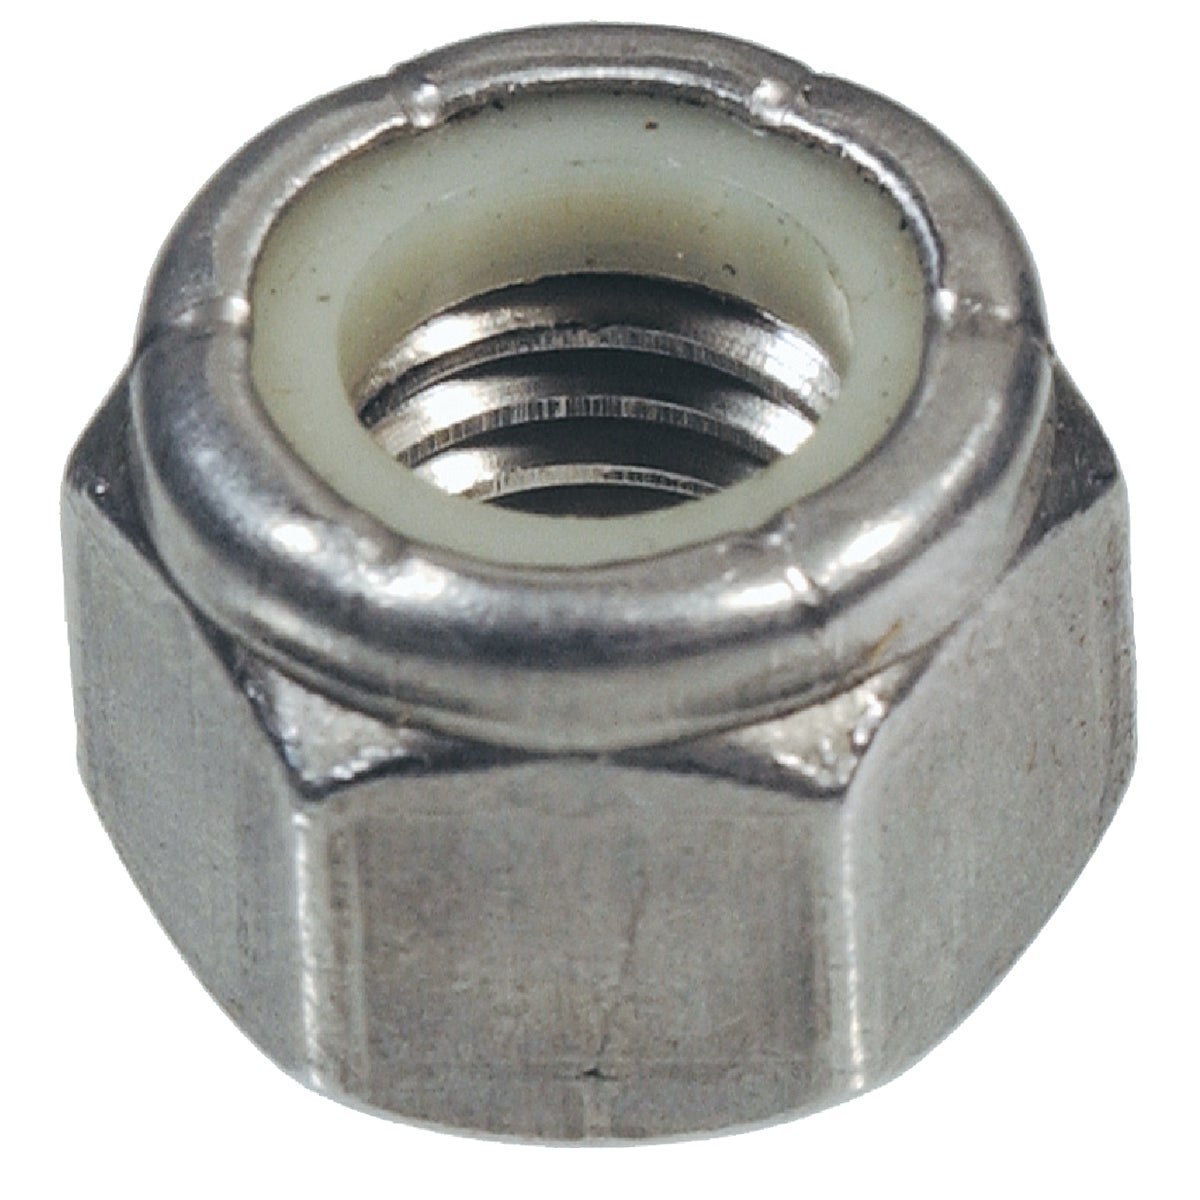 Item 726338, These nylon insert stop &amp; lock nuts are ideal to securely fasten a bolt